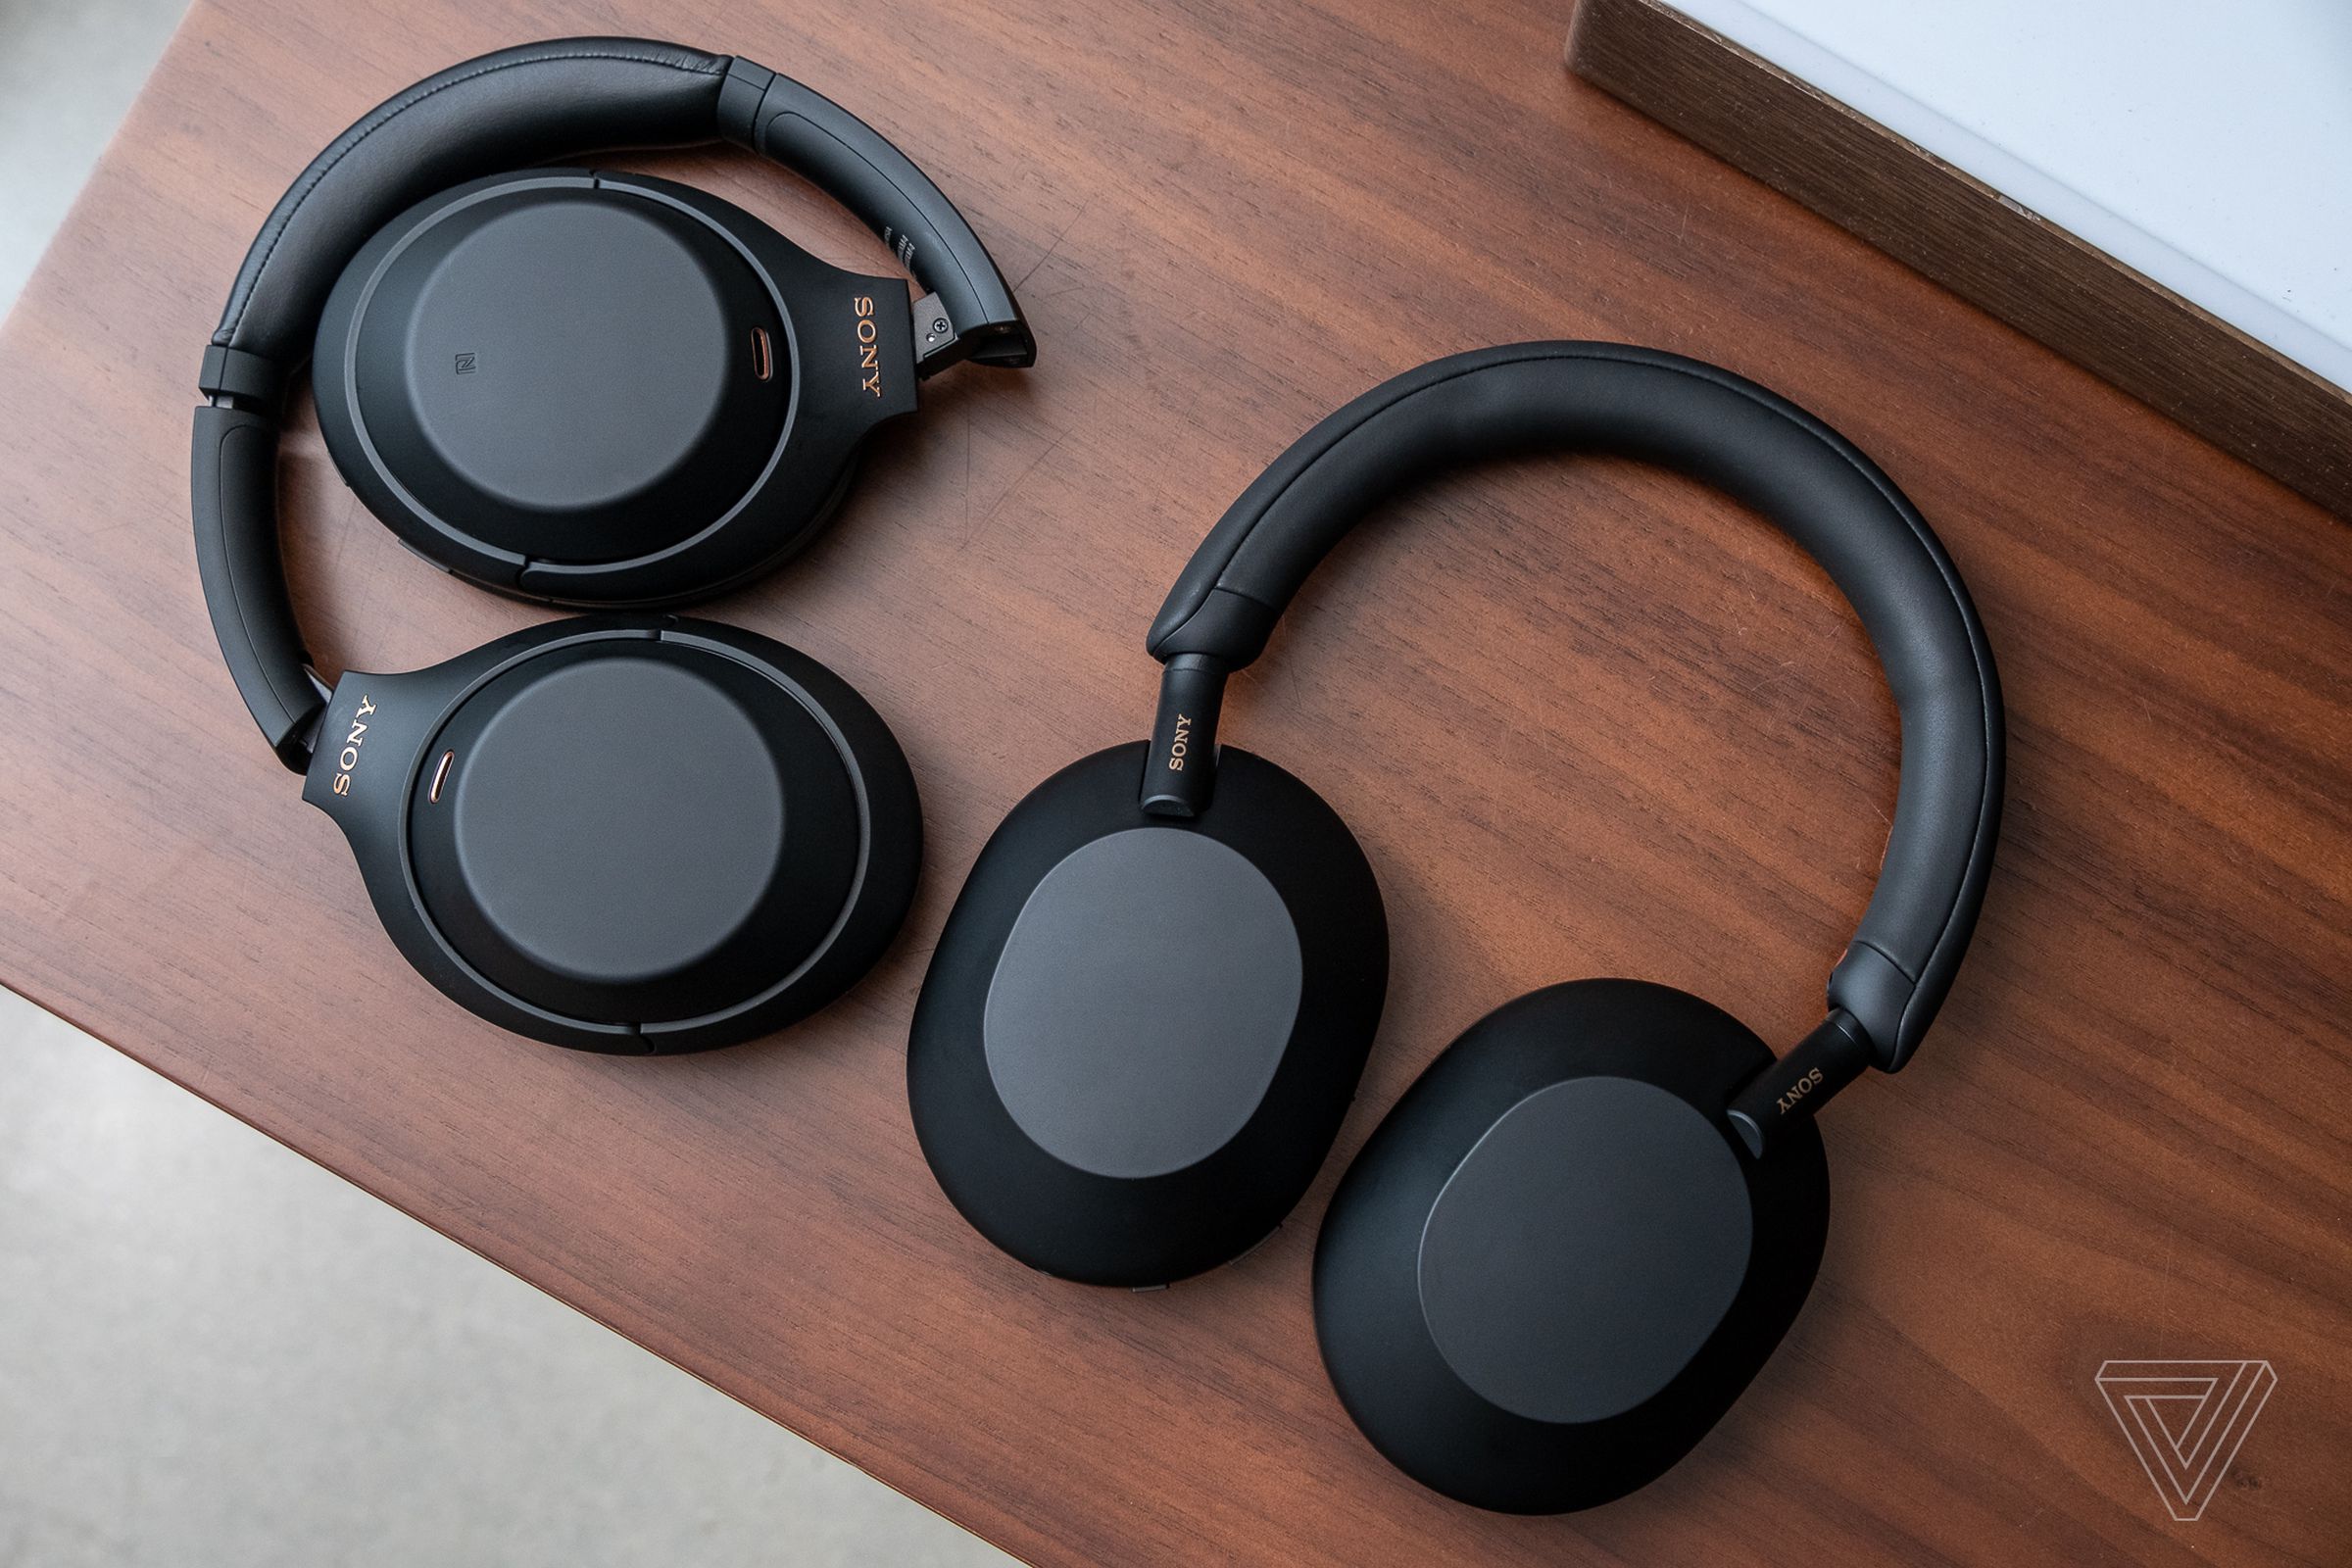 The new headphones can’t fold down like Sony’s previous models could.